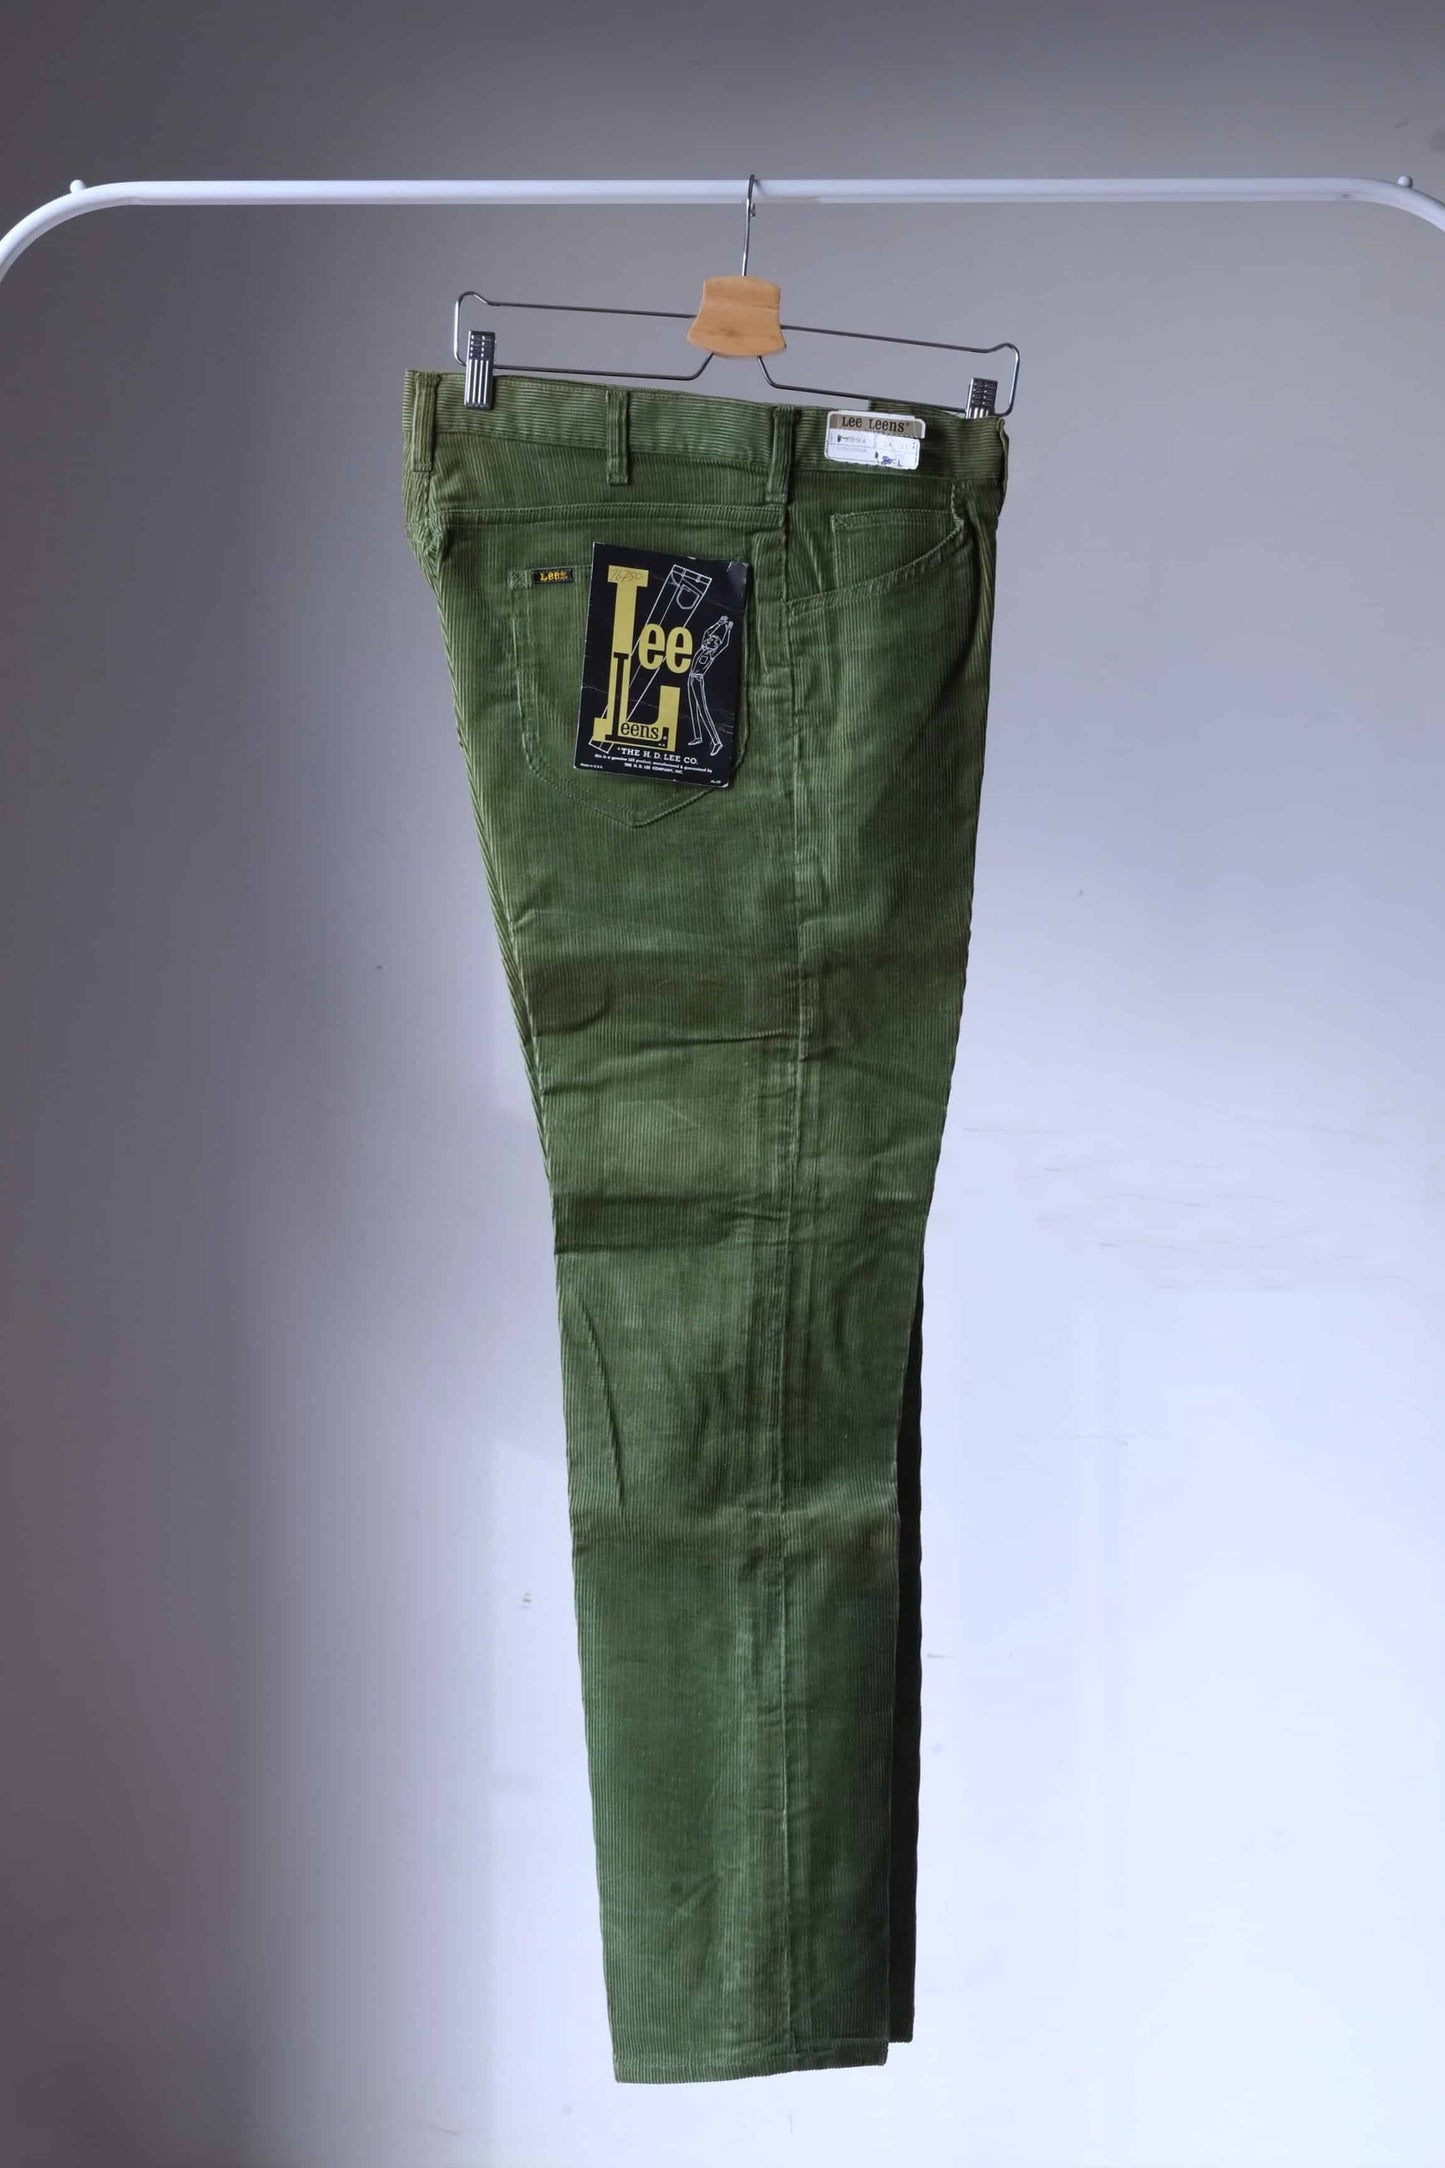 LEE Corduoroy Pants in olive green on hanger